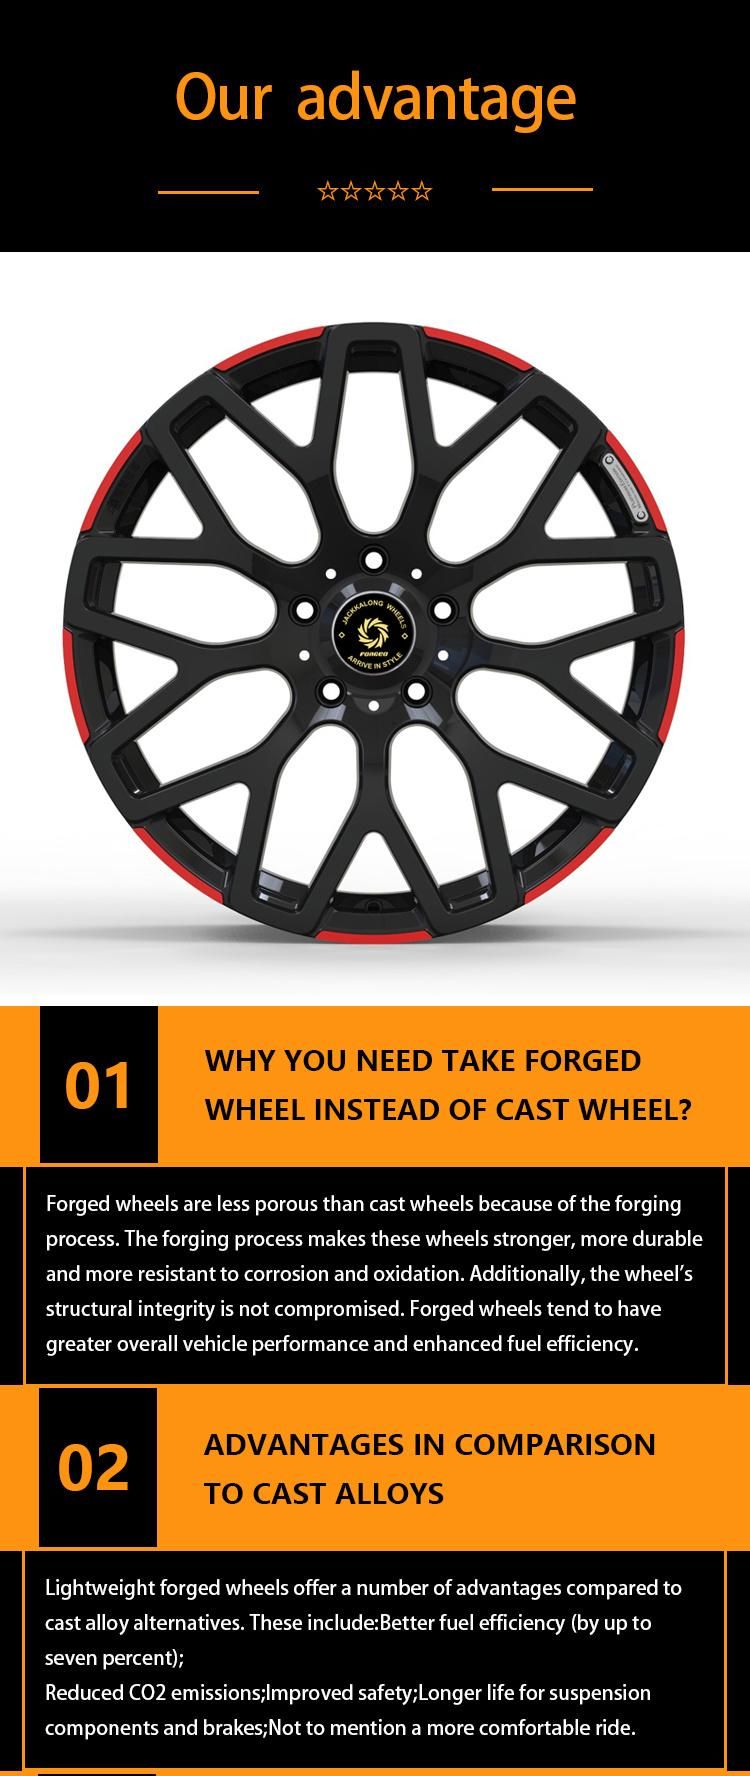 1 Piece Forged T6061 Alloy Rims Sport Aluminum Wheels for Customized Mag Rims Alloy Wheels Rims Wheels Forged Aluminum with Black Machined Lip+Milling